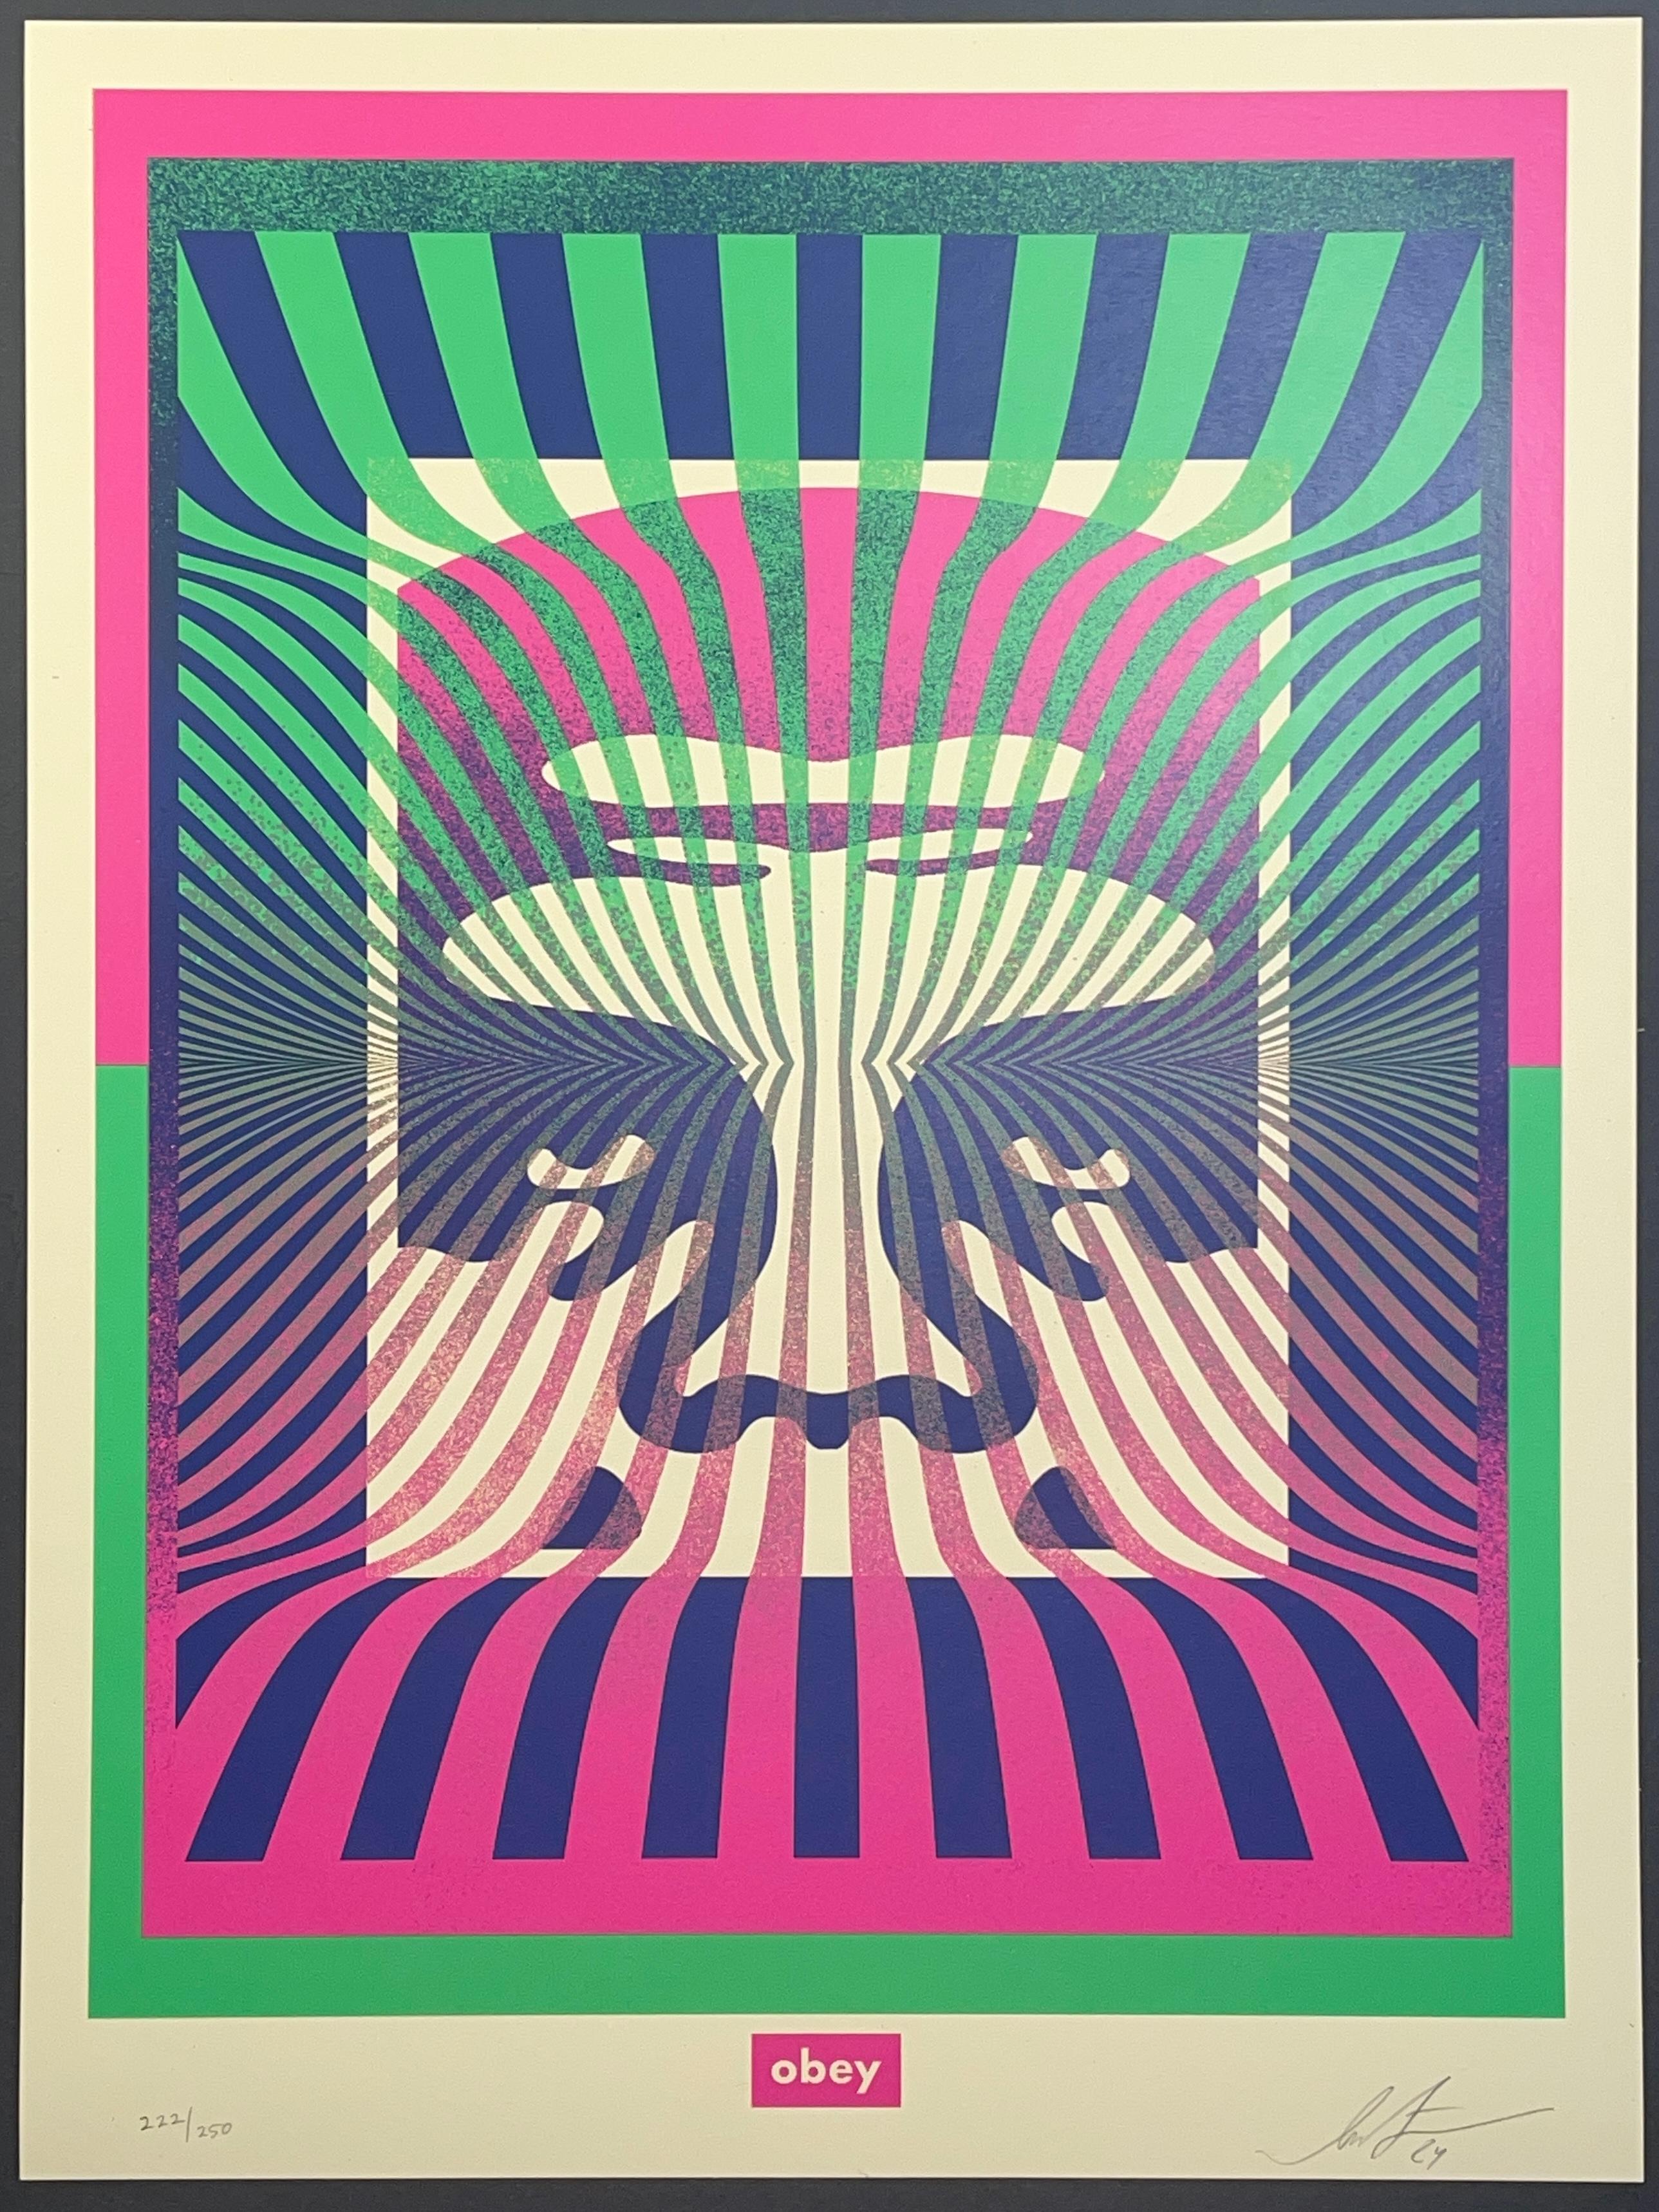 In the early ’90s, I fell in love with ’60s psychedelic posters from artists like San Francisco’s Victor Moscoso, Stanley Mouse, Alton Kelley, and Rick Griffin, as well as LA’s John Van Hamersveld. I was especially drawn to the op-art patterns and